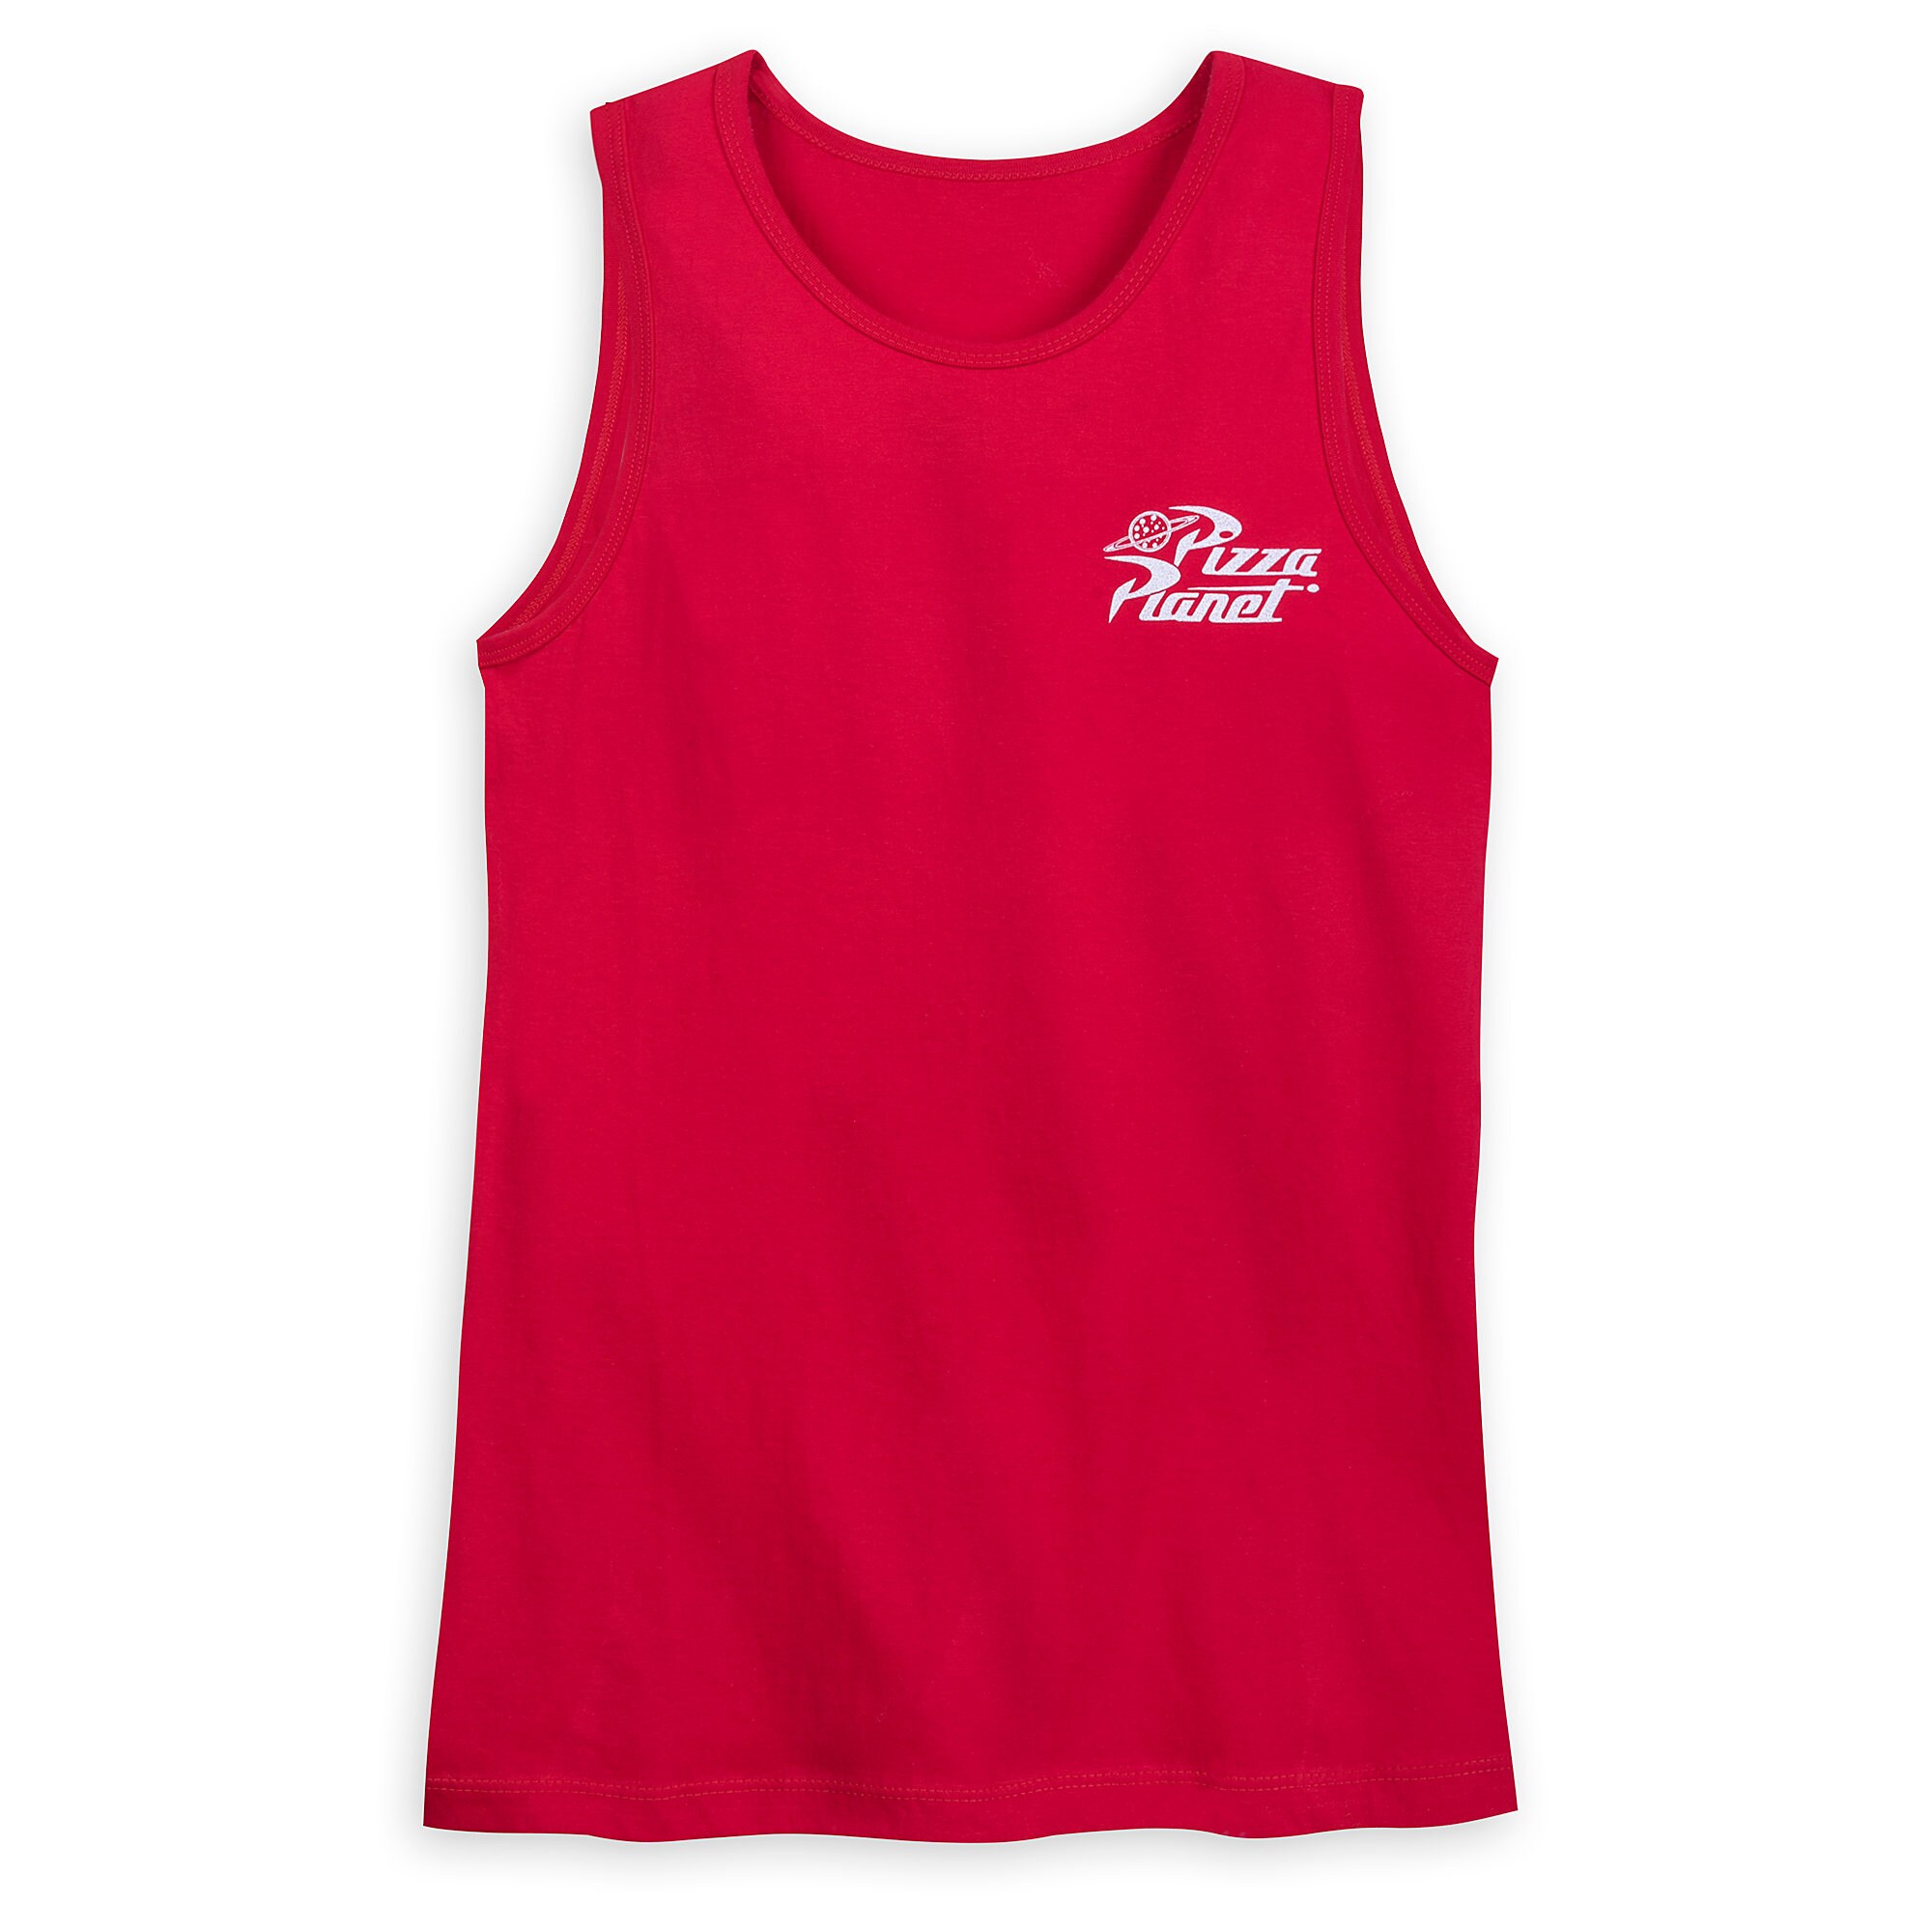 Pizza Planet Tank Top for Men - Toy Story